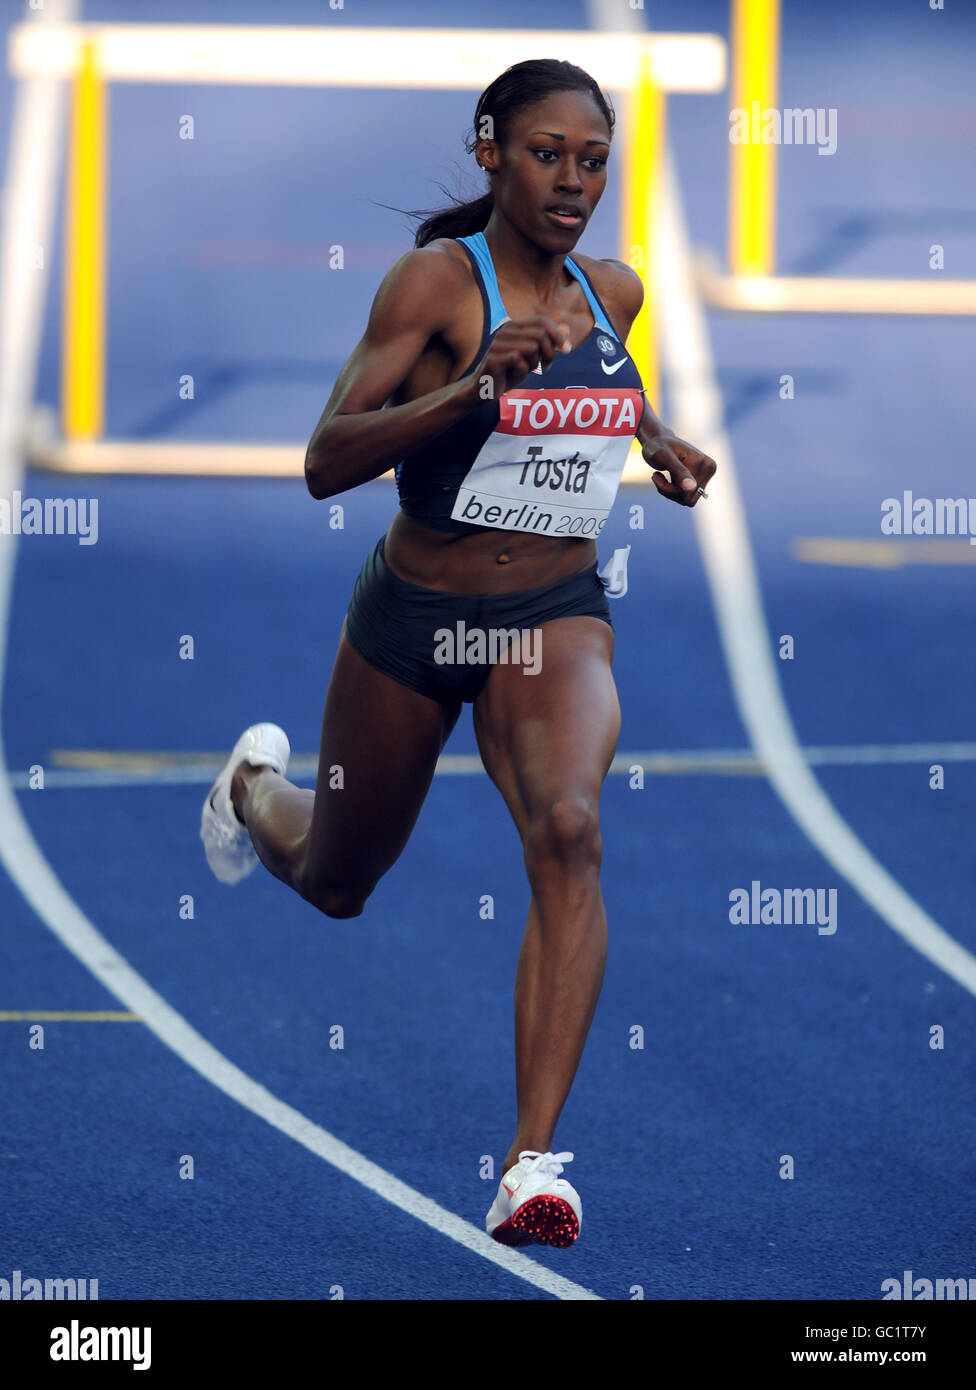 Athletics - IAAF World Athletics Championships - Day Three - Berlin 2009 - Olympiastadion. USA's Sheena Tosta in action during the 400 metre hurdles Stock Photo